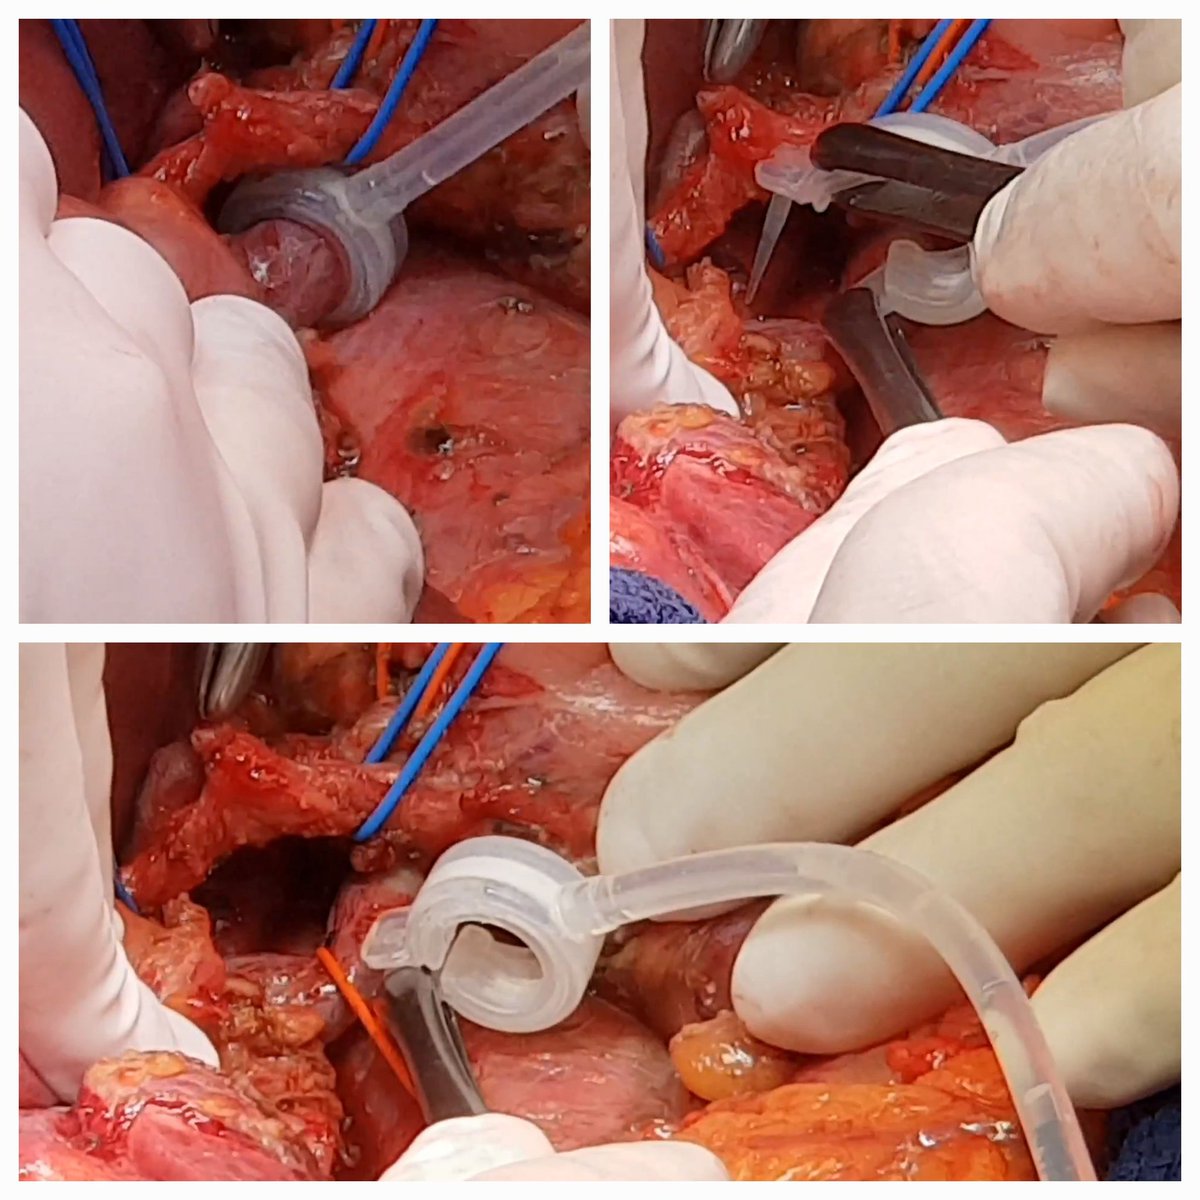 I have perhaps the solution to modulate the portal flow in Rapid Procedure ! I created this ring 5 year ago : no interest in Small For Size Syndrom after hepatectomy BUT new horizon for it in RAPID !! @ISLS2023 @_ILTS_ @ESOTtransplant @dbalci @hpb_so @sapisochin @ILLS_LAPLIVER